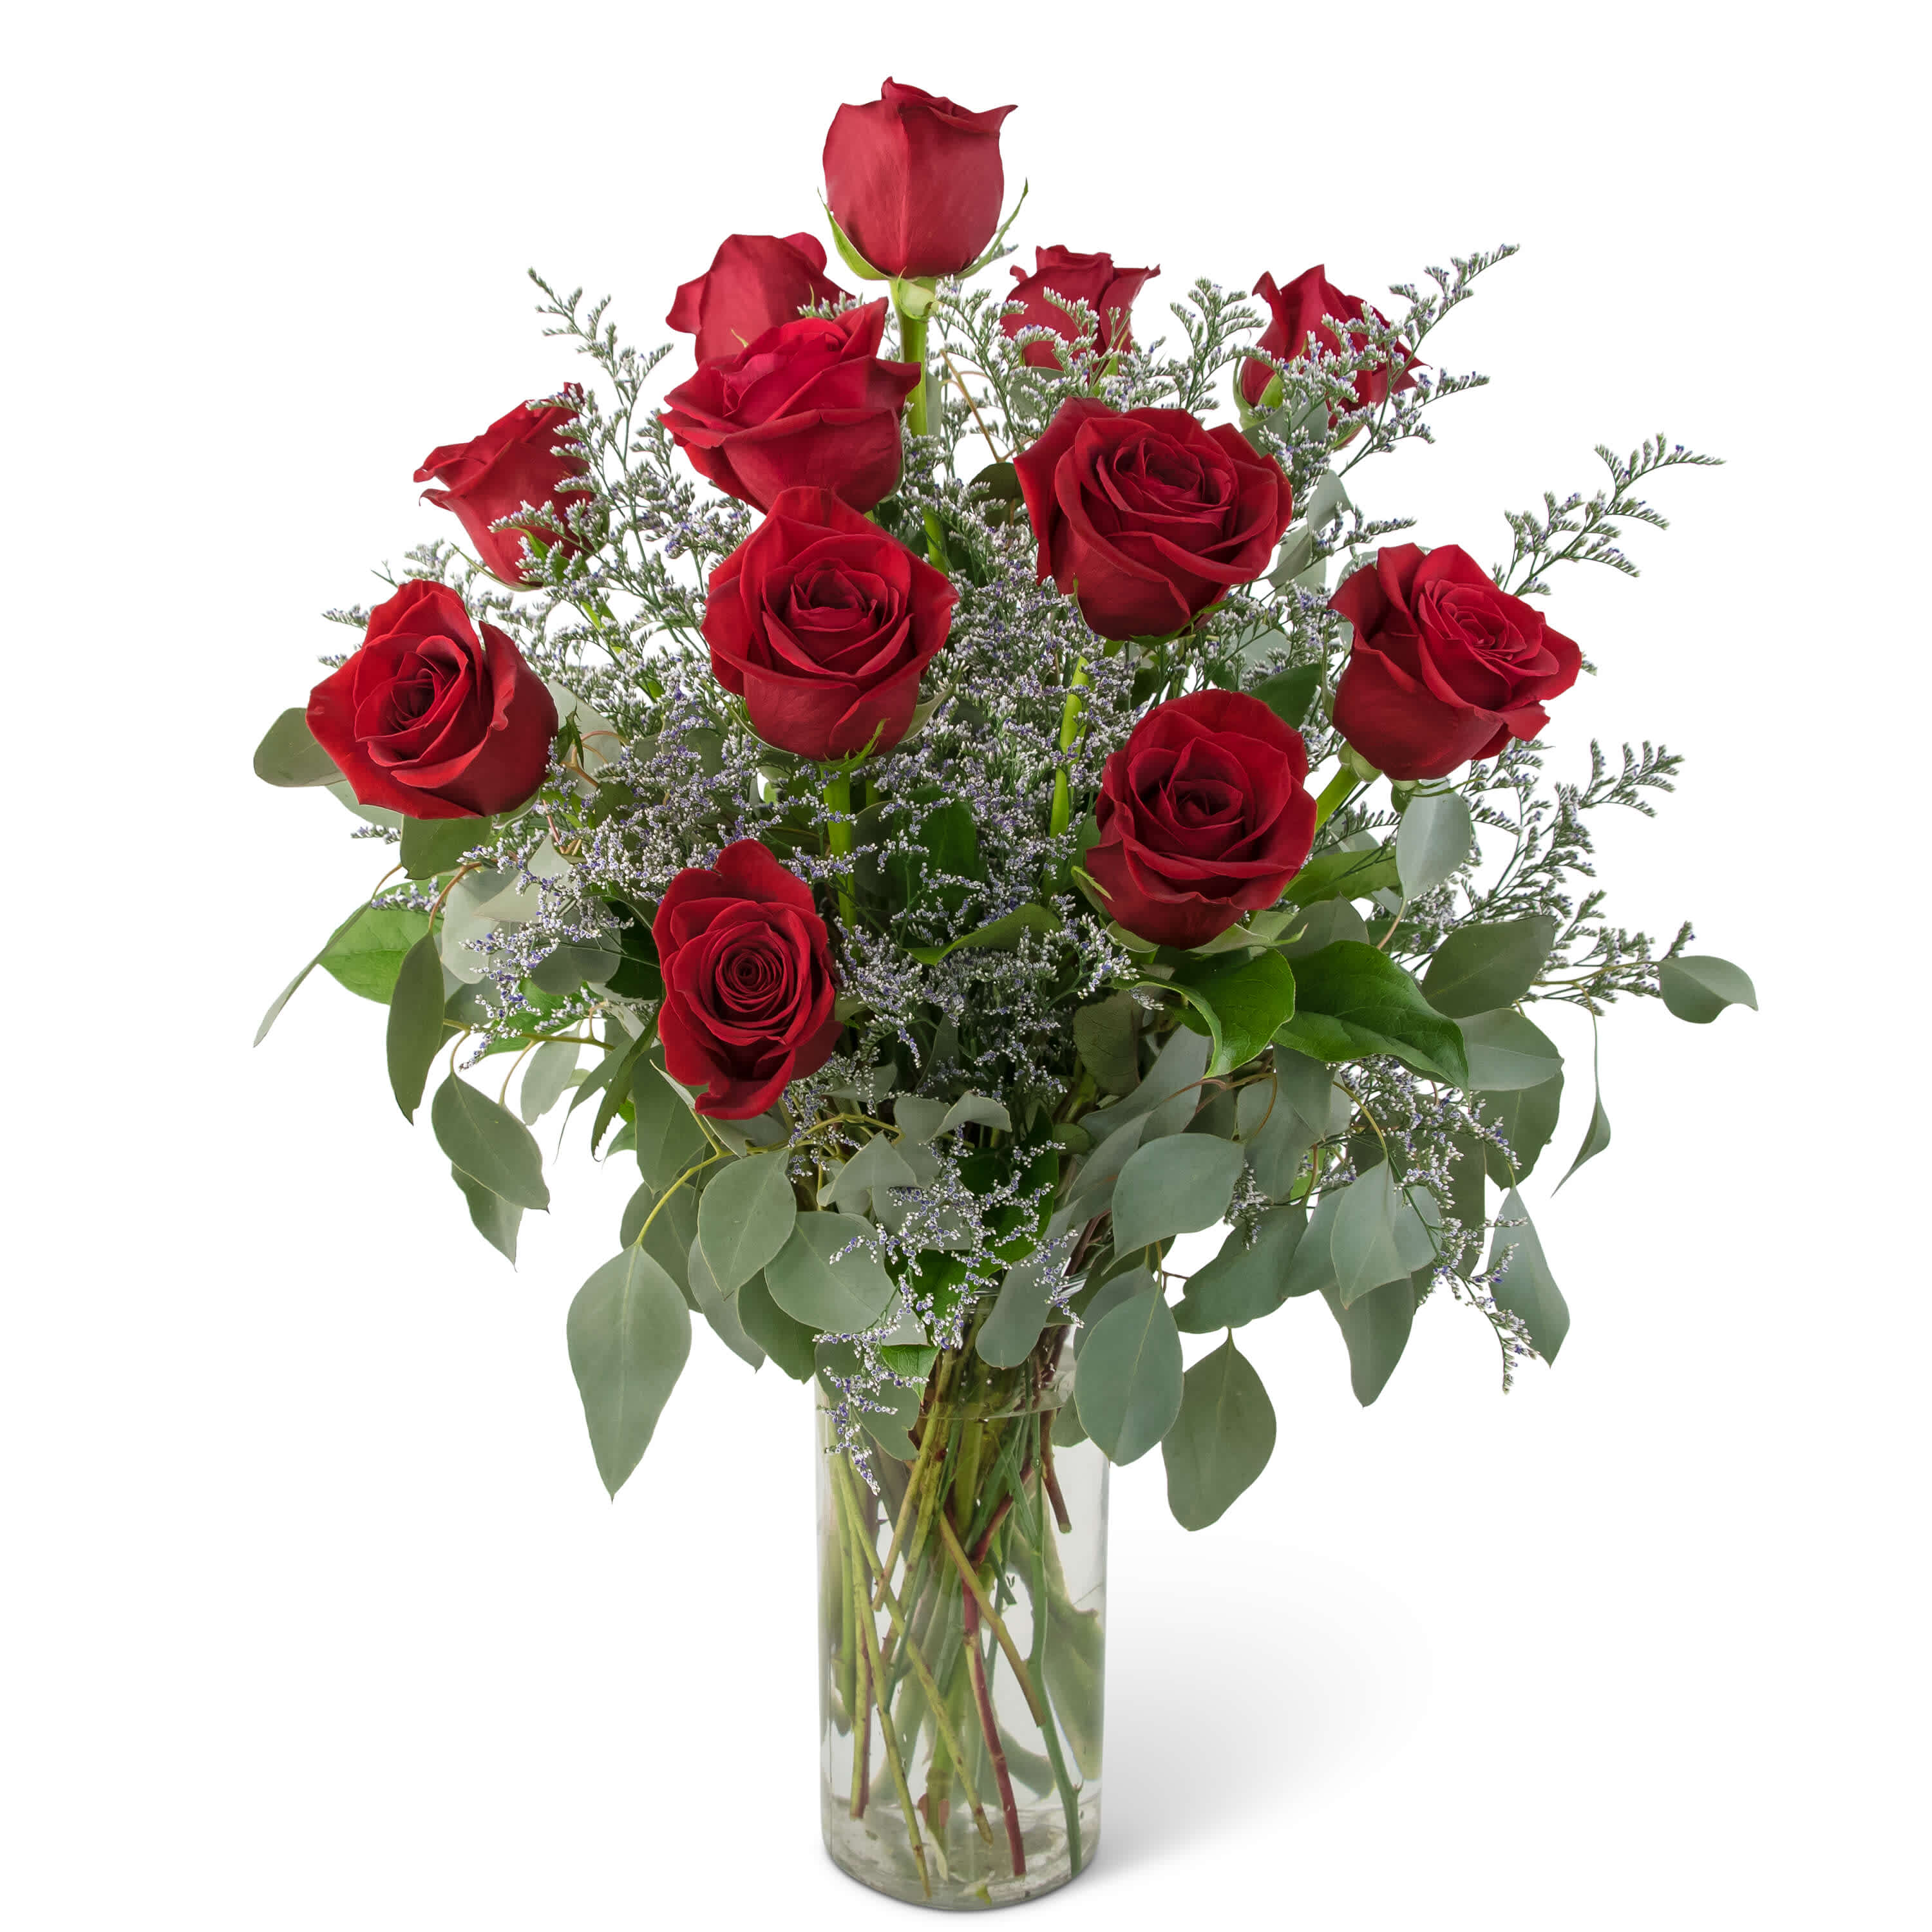 Elegance and Grace - When you want to impress you always send the best. One dozen of our finest long stem red roses and premium greenery fill this larger than life bouquet. This floral gift simply expresses Elegance and Grace. 